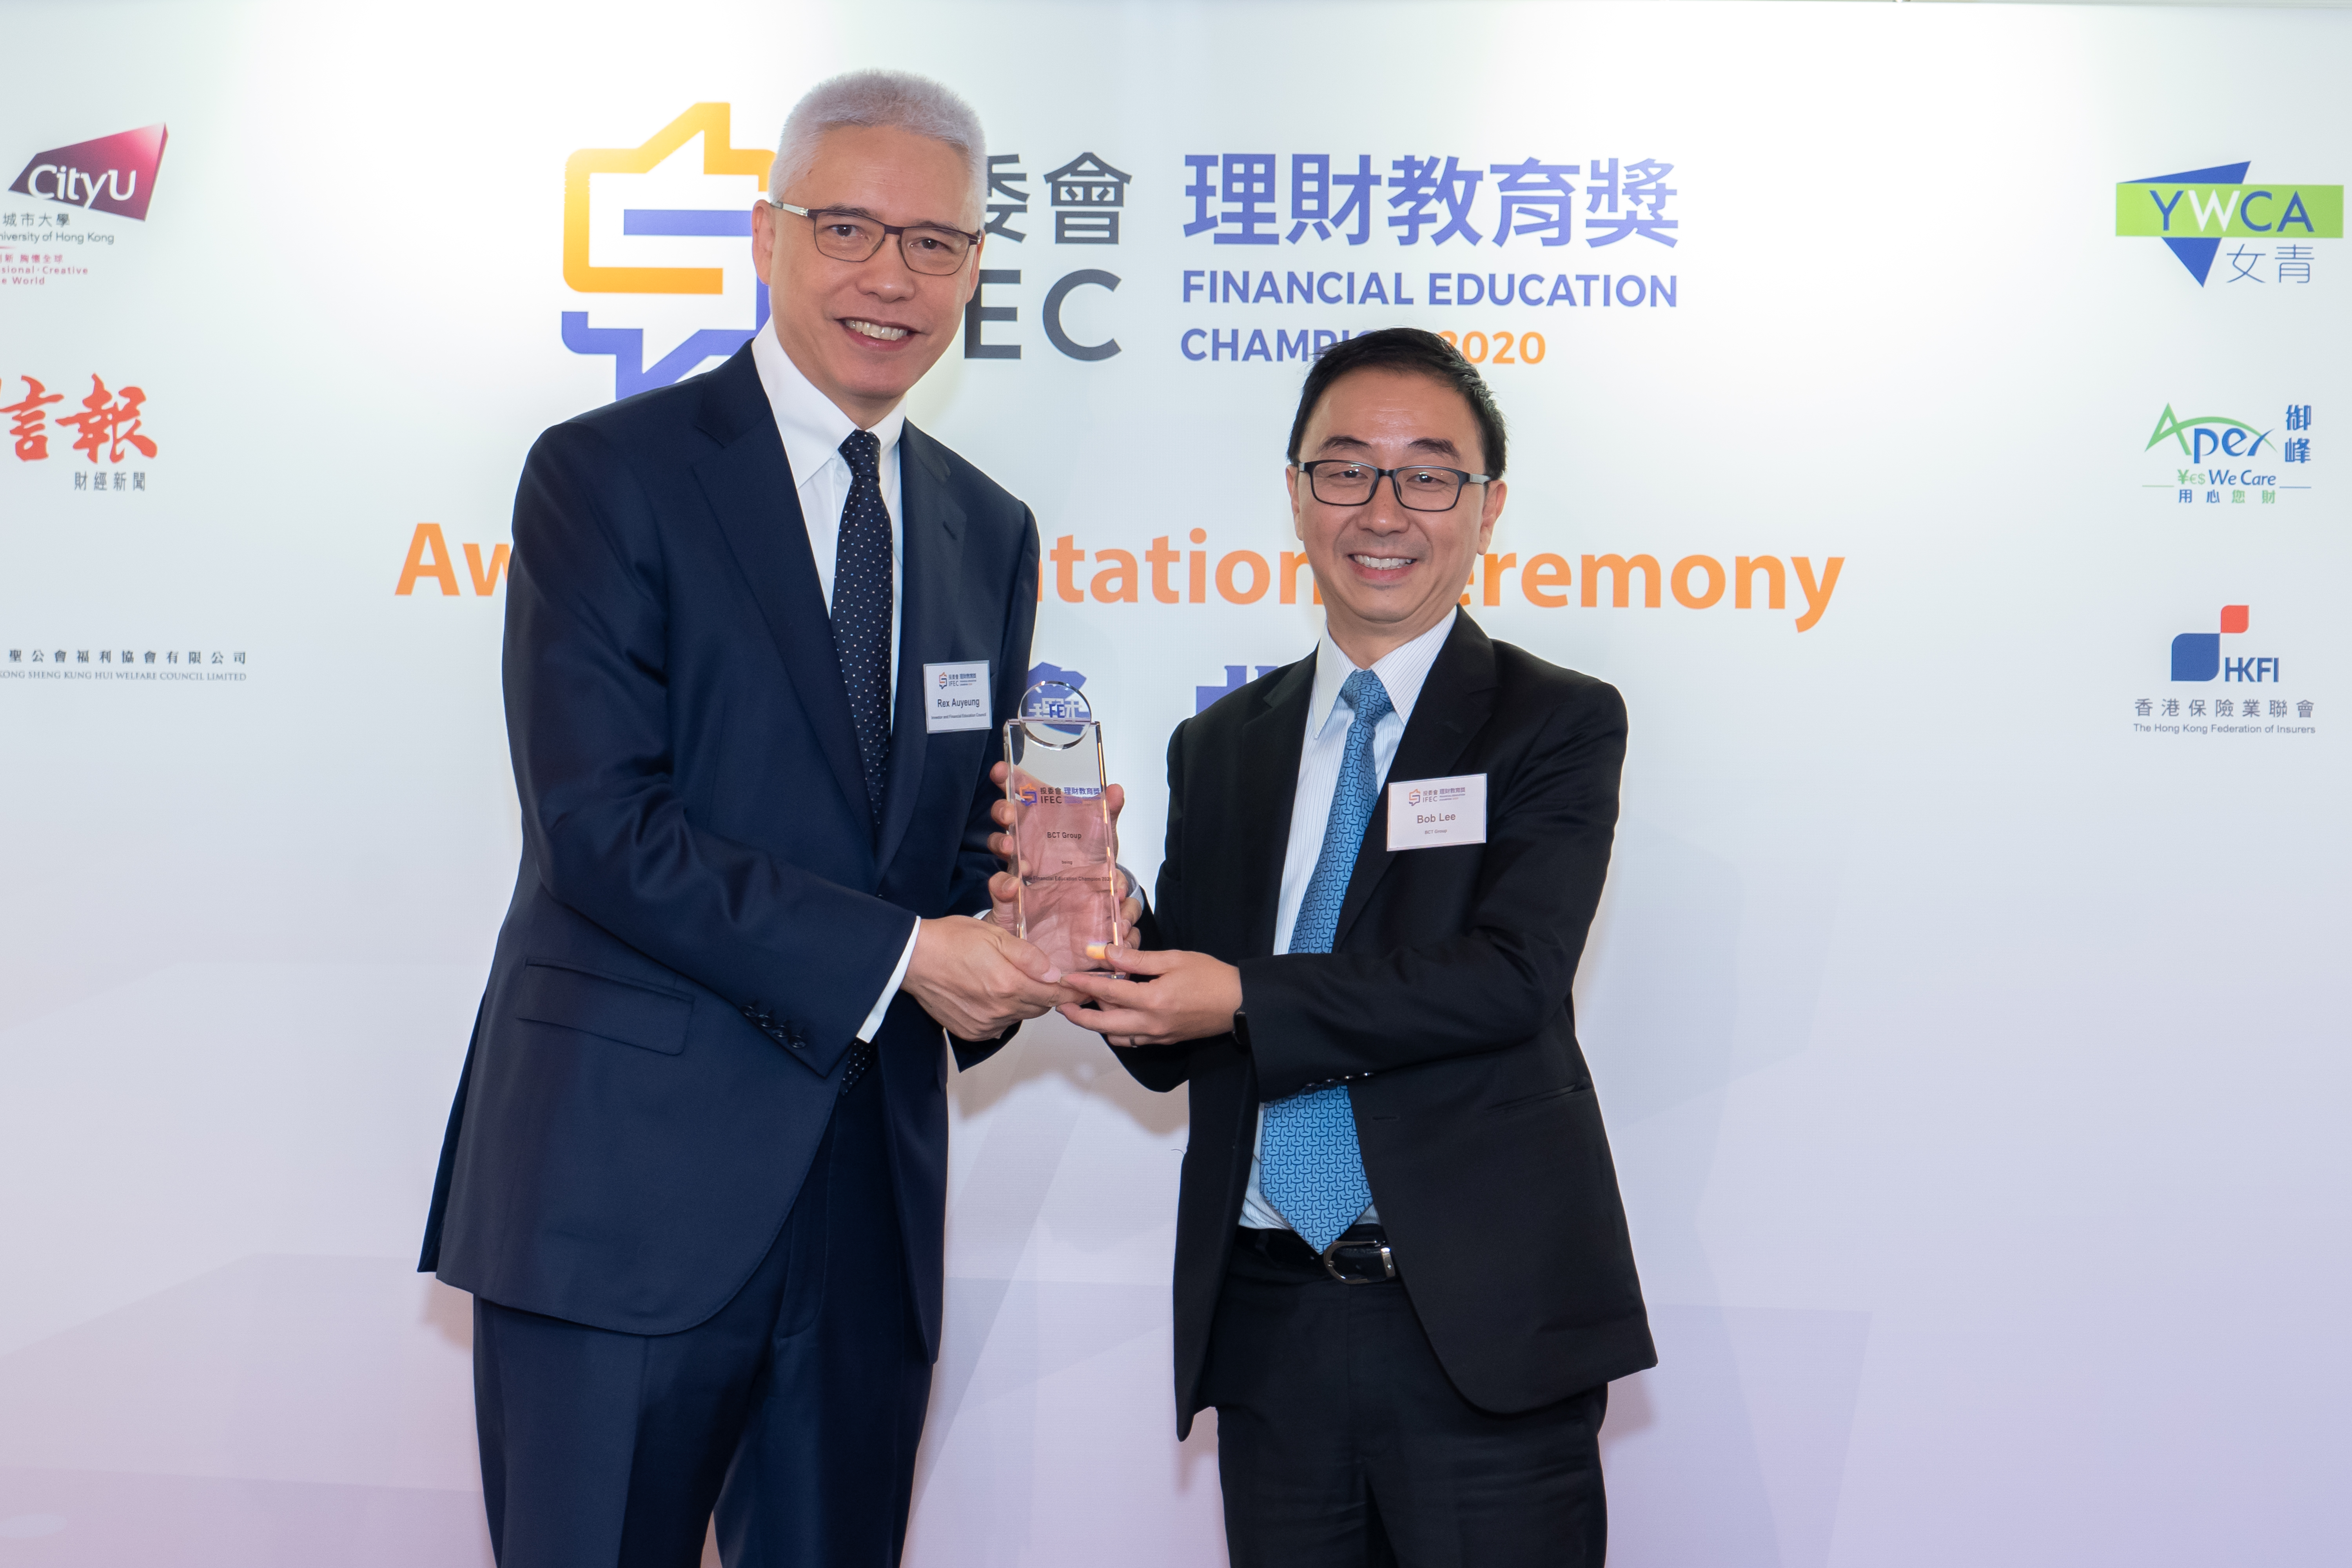 Bob Lee, Chief Business Officer of BCT Group (right), received the award from Rex Auyeung, member of the Board of Directors of the Investor and Financial Education Council (left)